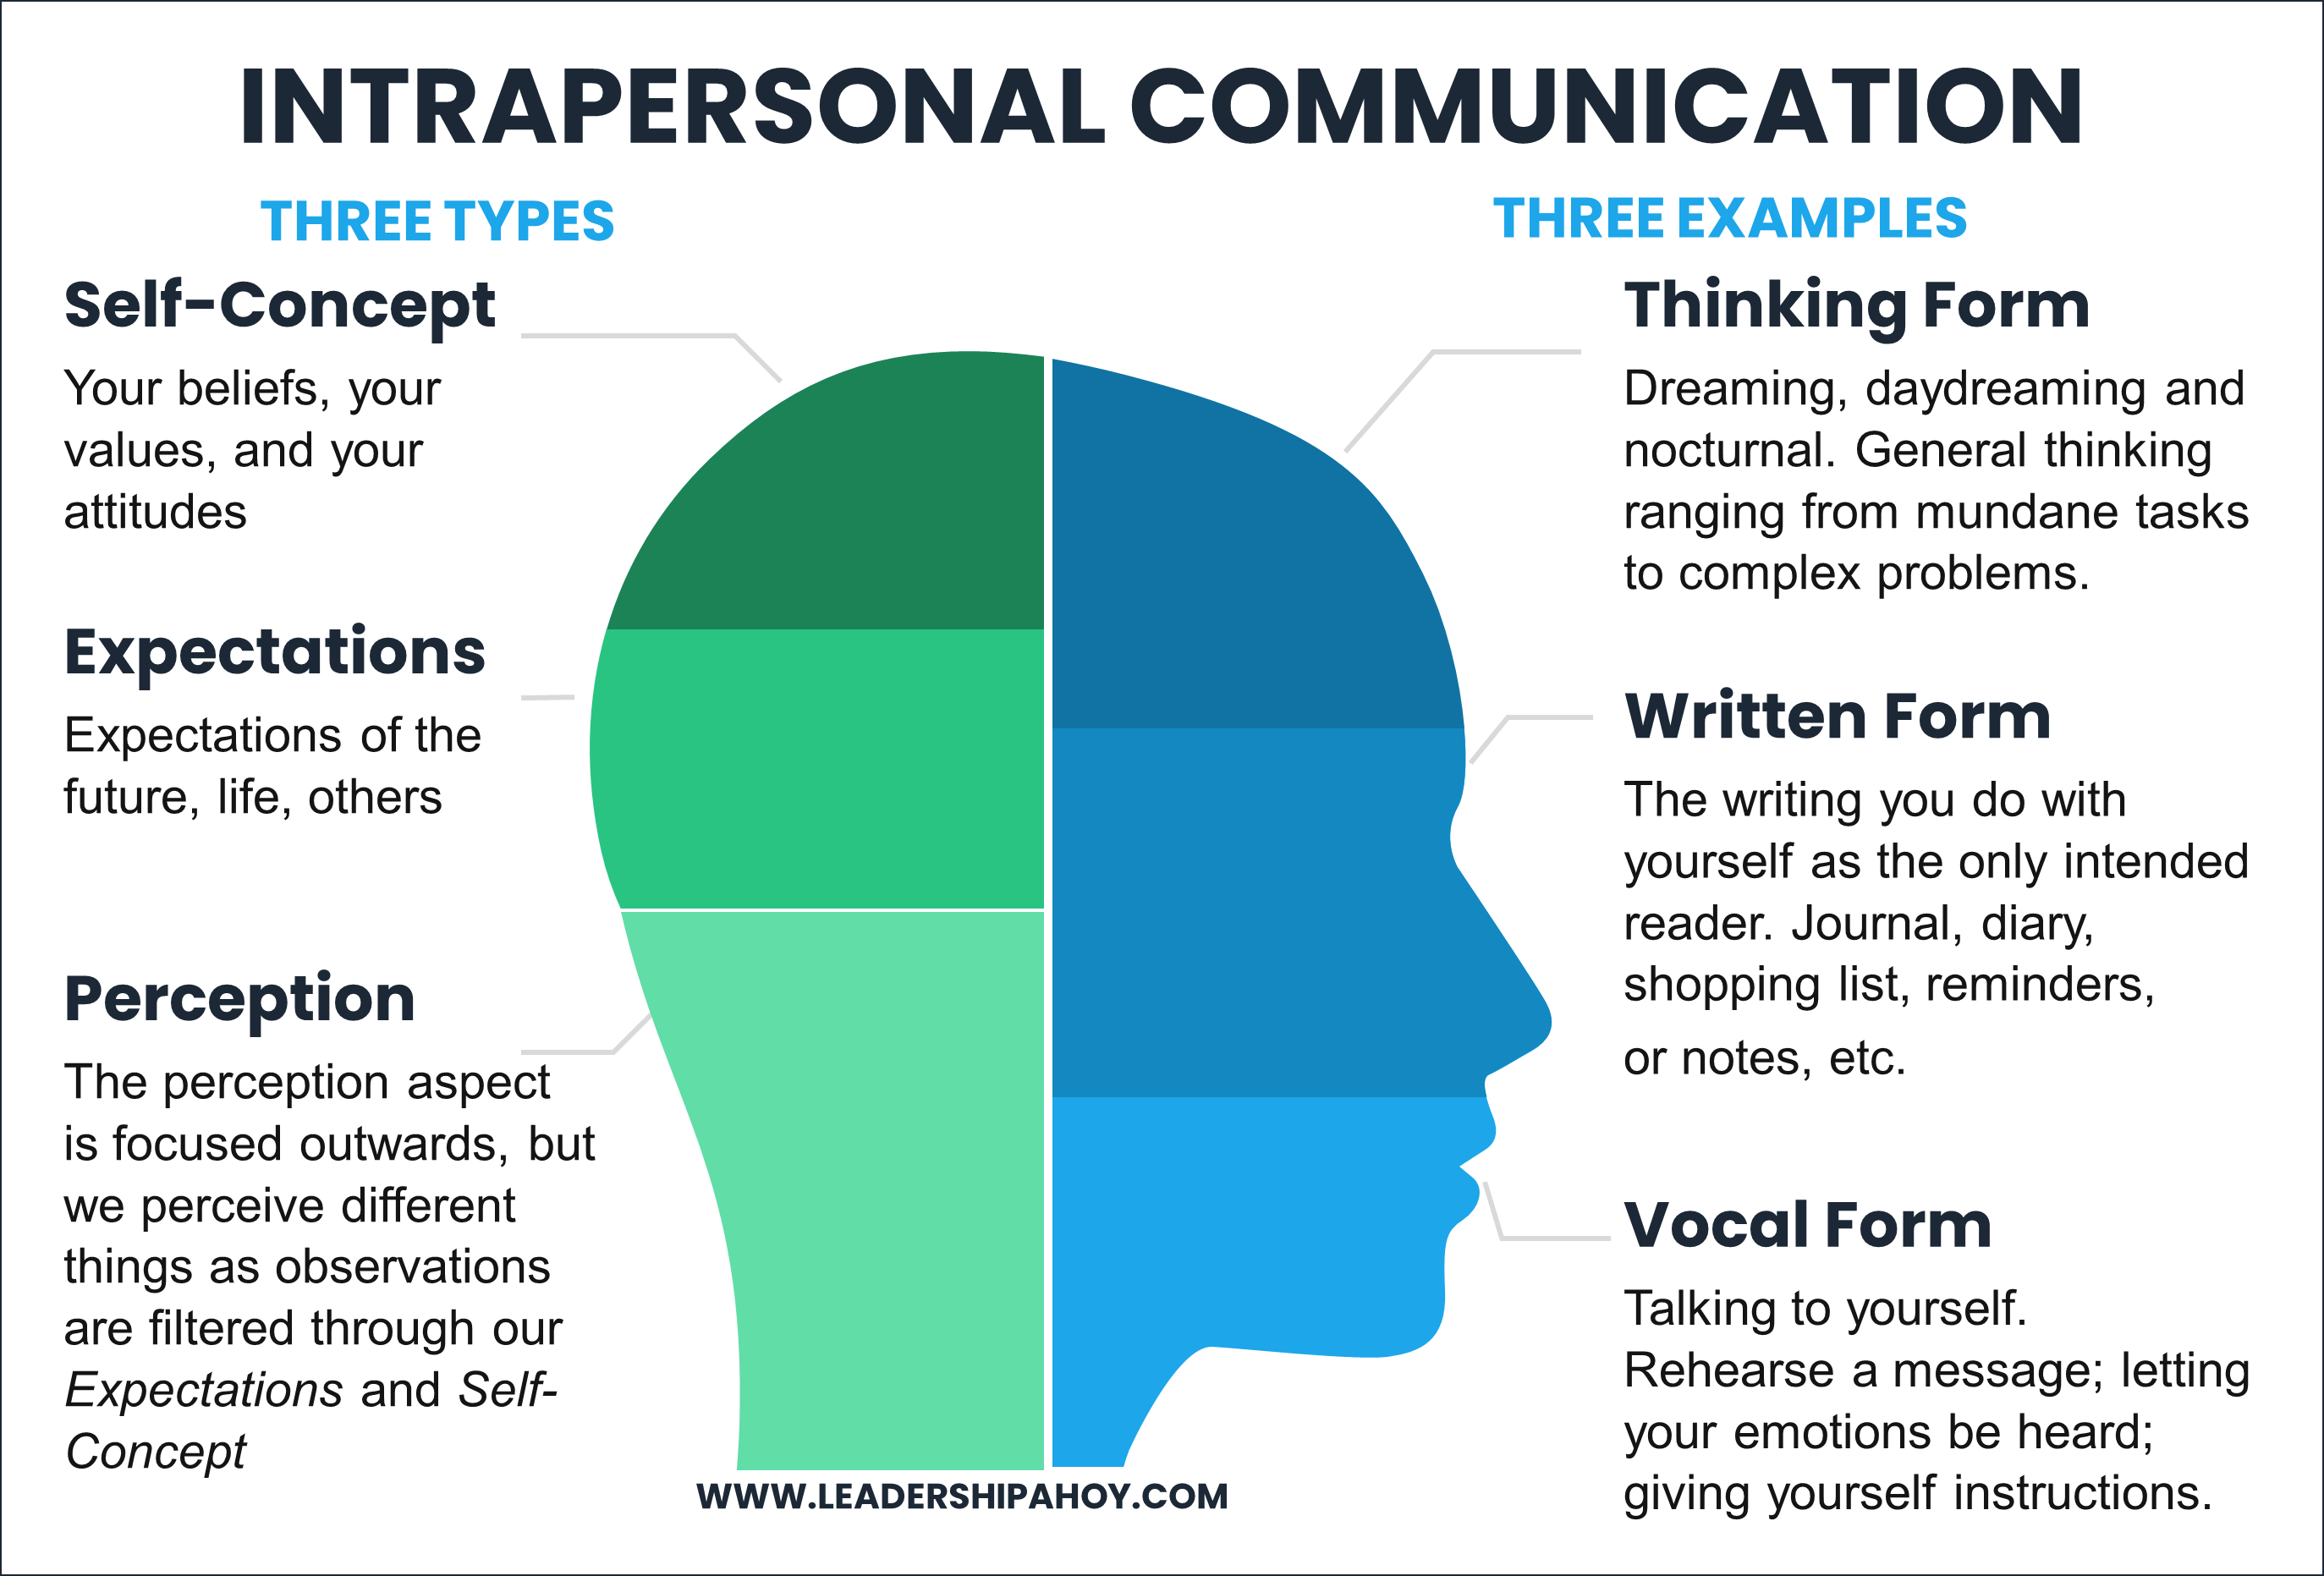 Intrapersonal communication infographic